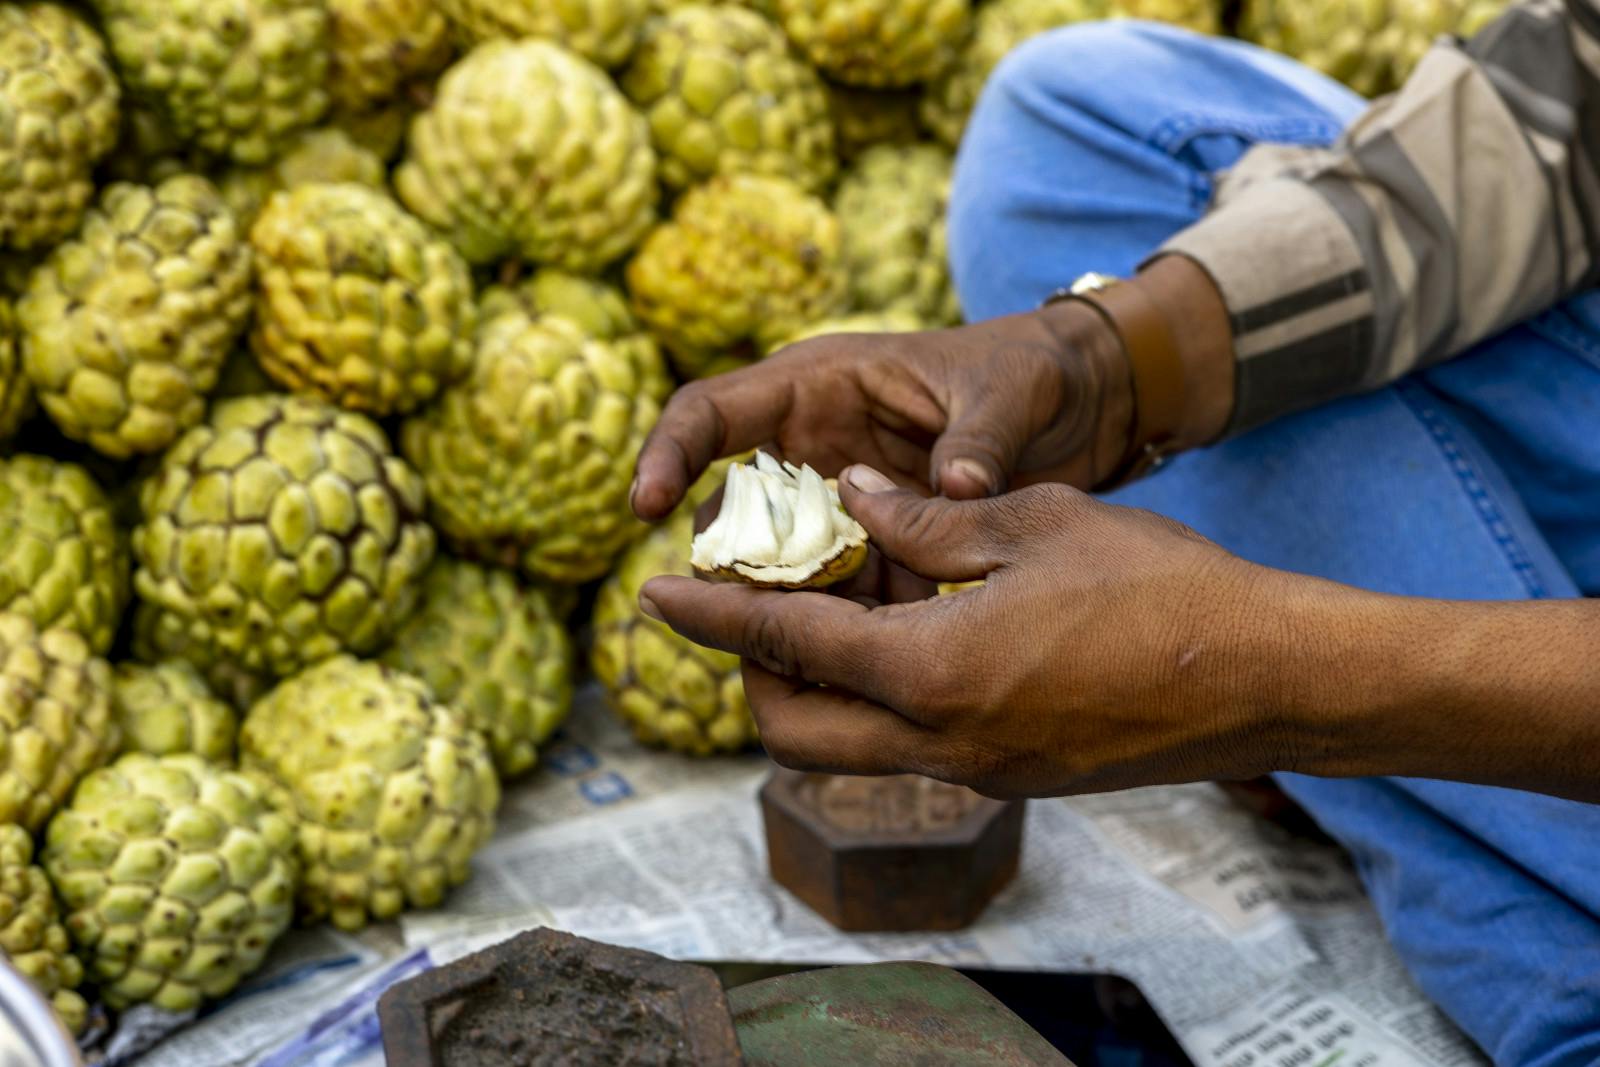 Custard apples sold in Mumbai, India (Godong/Universal Images Group via Getty Images)